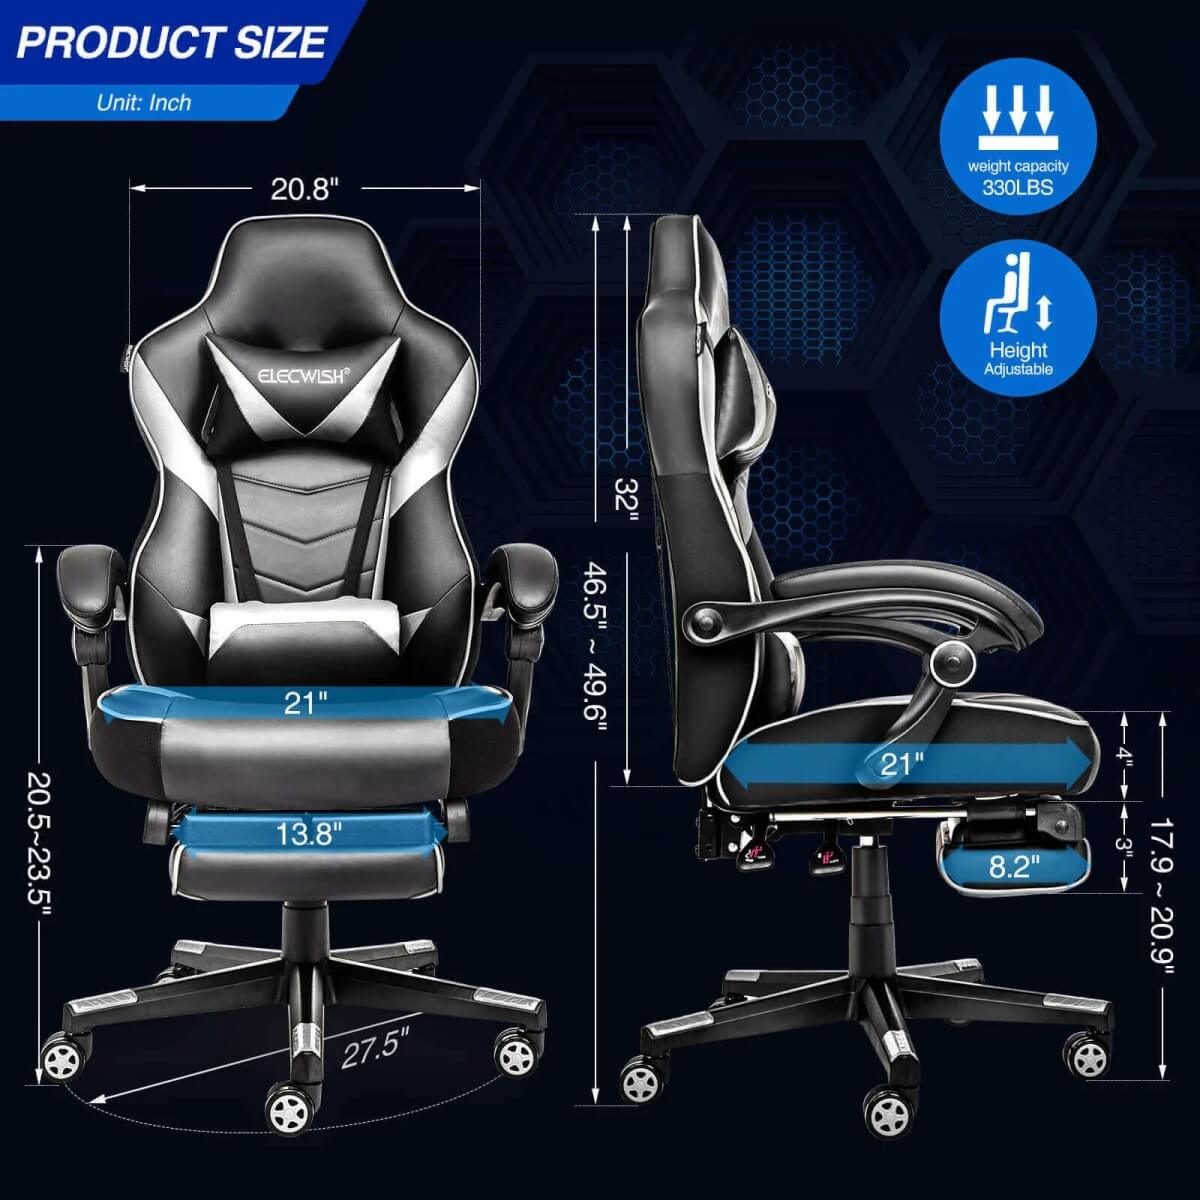 Elecwish Video Game Chairs White Gaming Chair With Footrest OC087 size